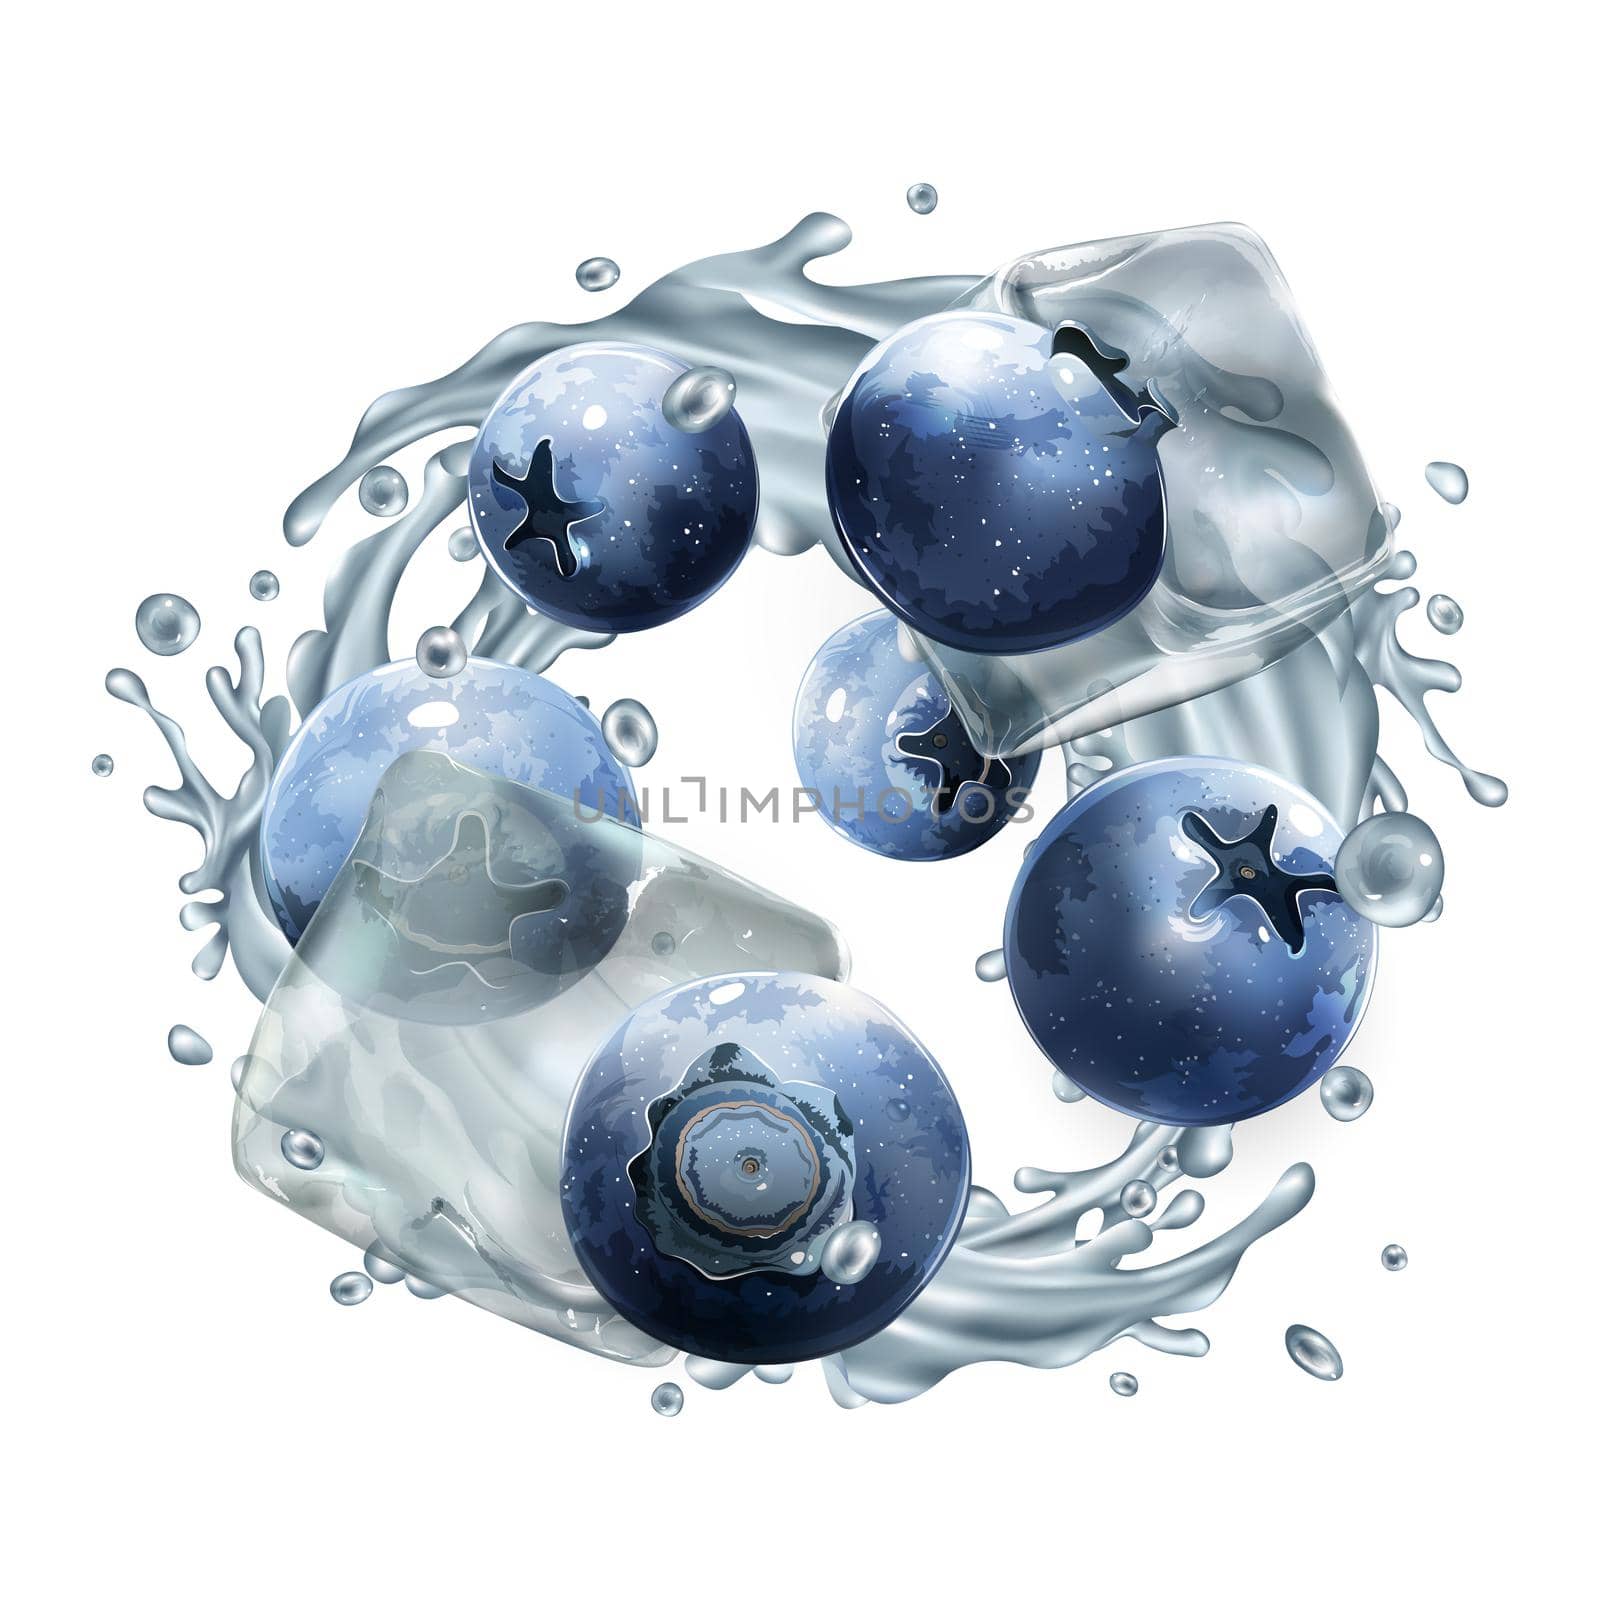 Composition with fresh blueberries and ice cubes on a white background. Realistic style illustration.